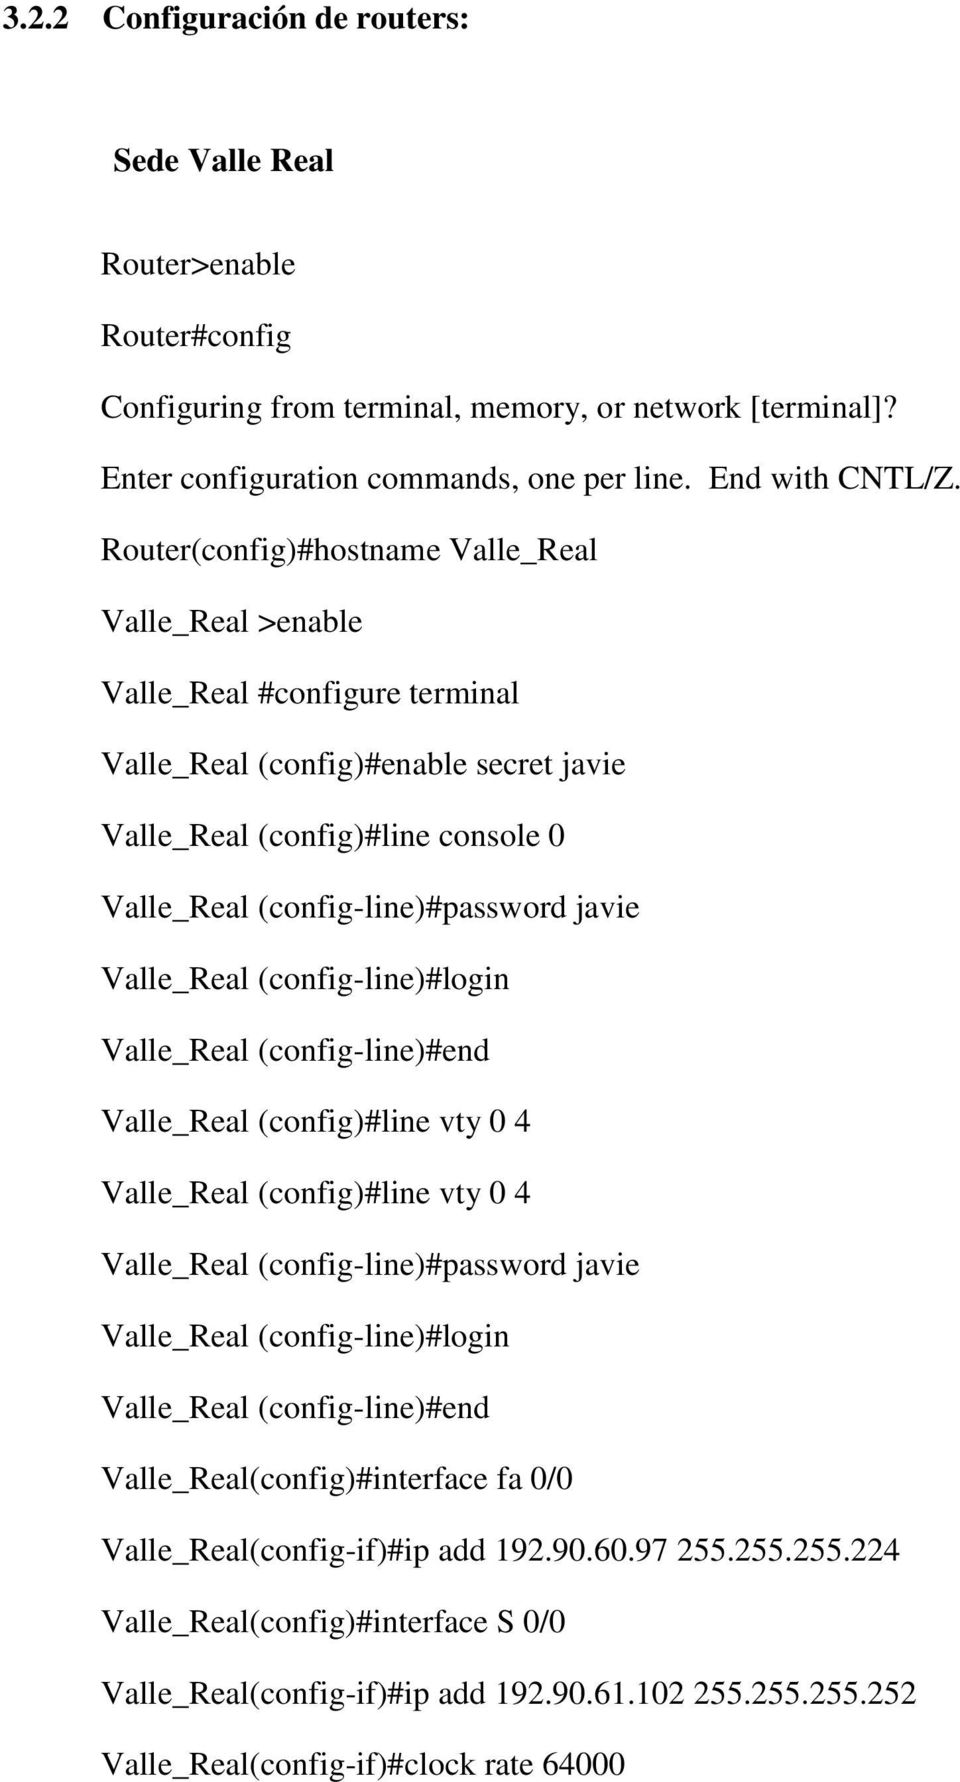 Valle_Real (config-line)#login Valle_Real (config-line)#end Valle_Real (config)#line vty 0 4 Valle_Real (config)#line vty 0 4 Valle_Real (config-line)#password javie Valle_Real (config-line)#login